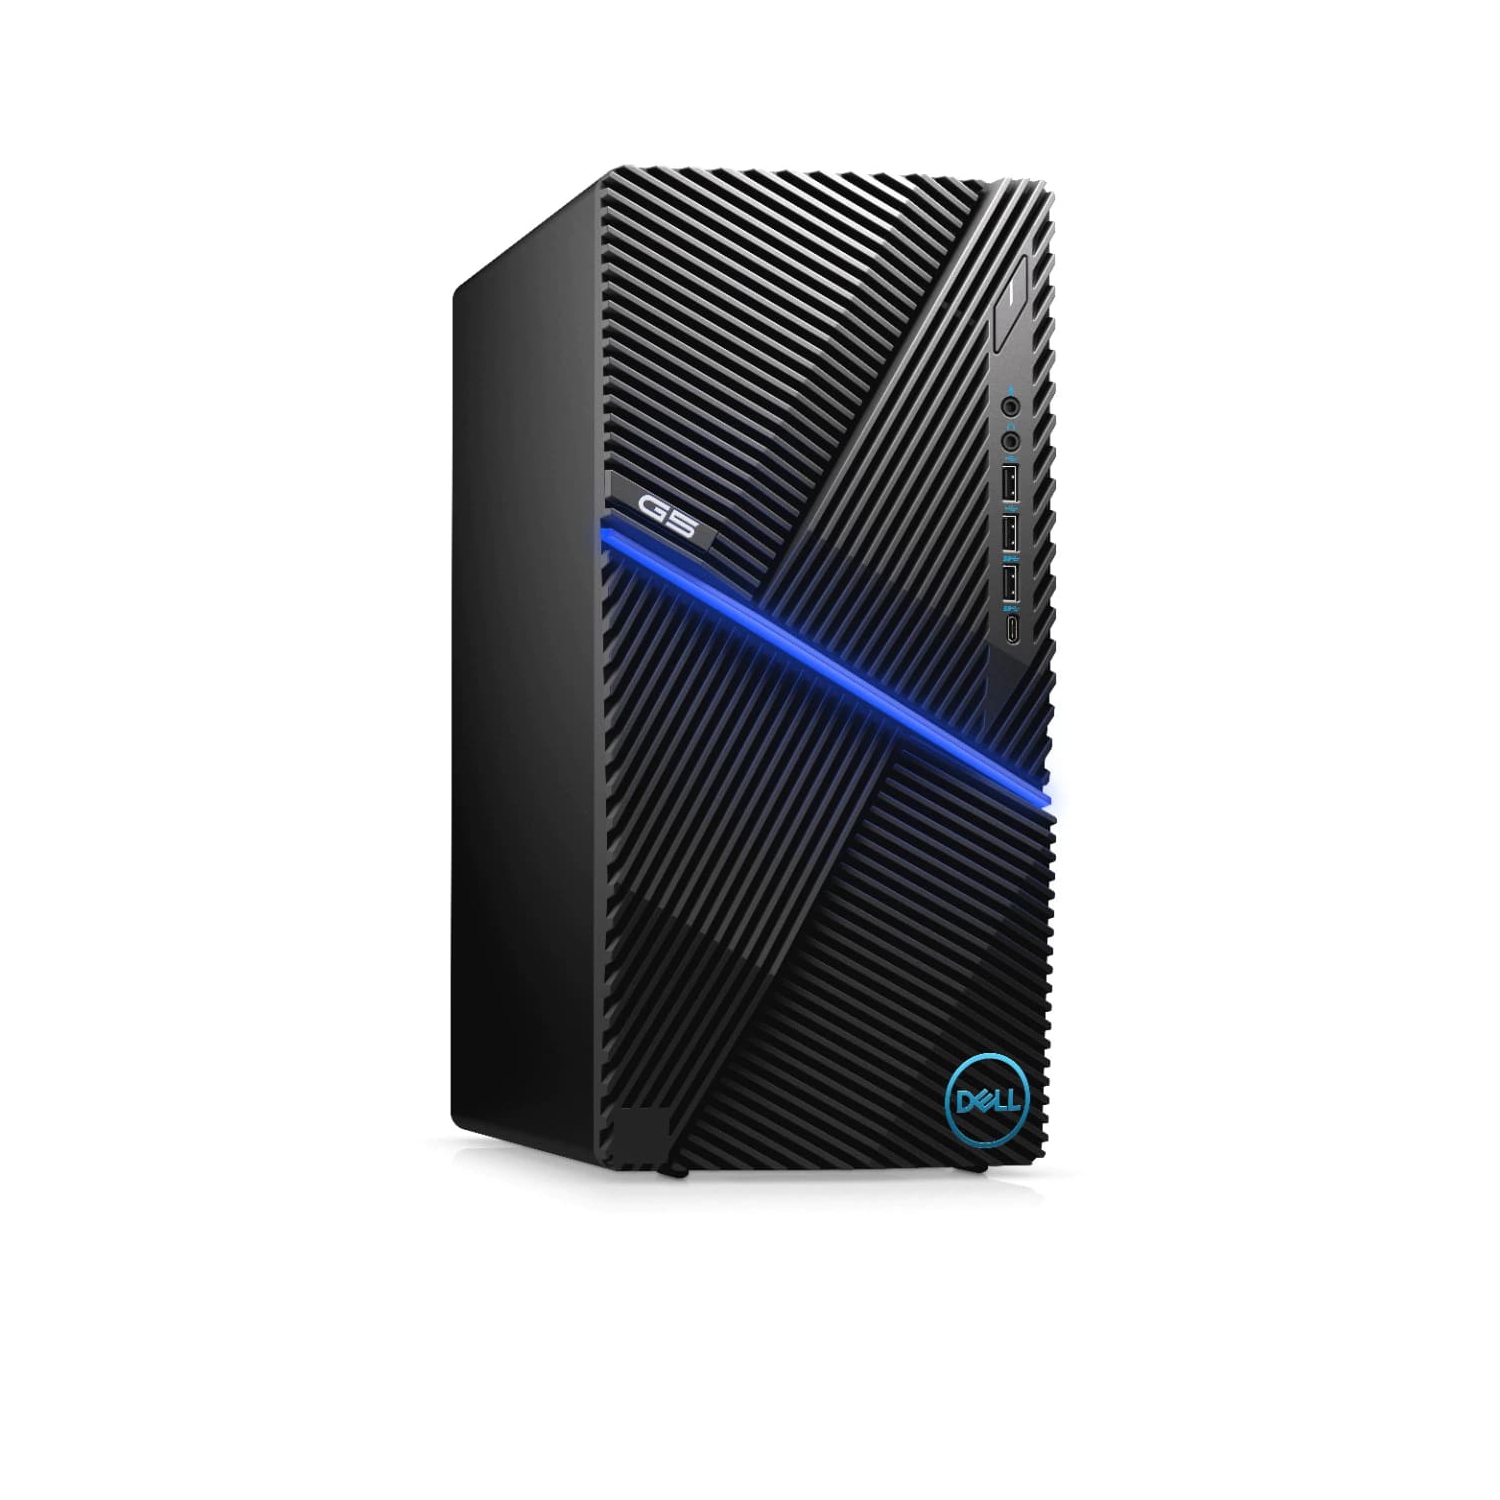 Refurbished (Excellent) - Dell G5 5000 Gaming Desktop (2020) | Core i7 - 512GB SSD - 16GB RAM - RTX 2060 | 8 Cores @ 5.1 GHz - 10th Gen CPU Certified Refurbished